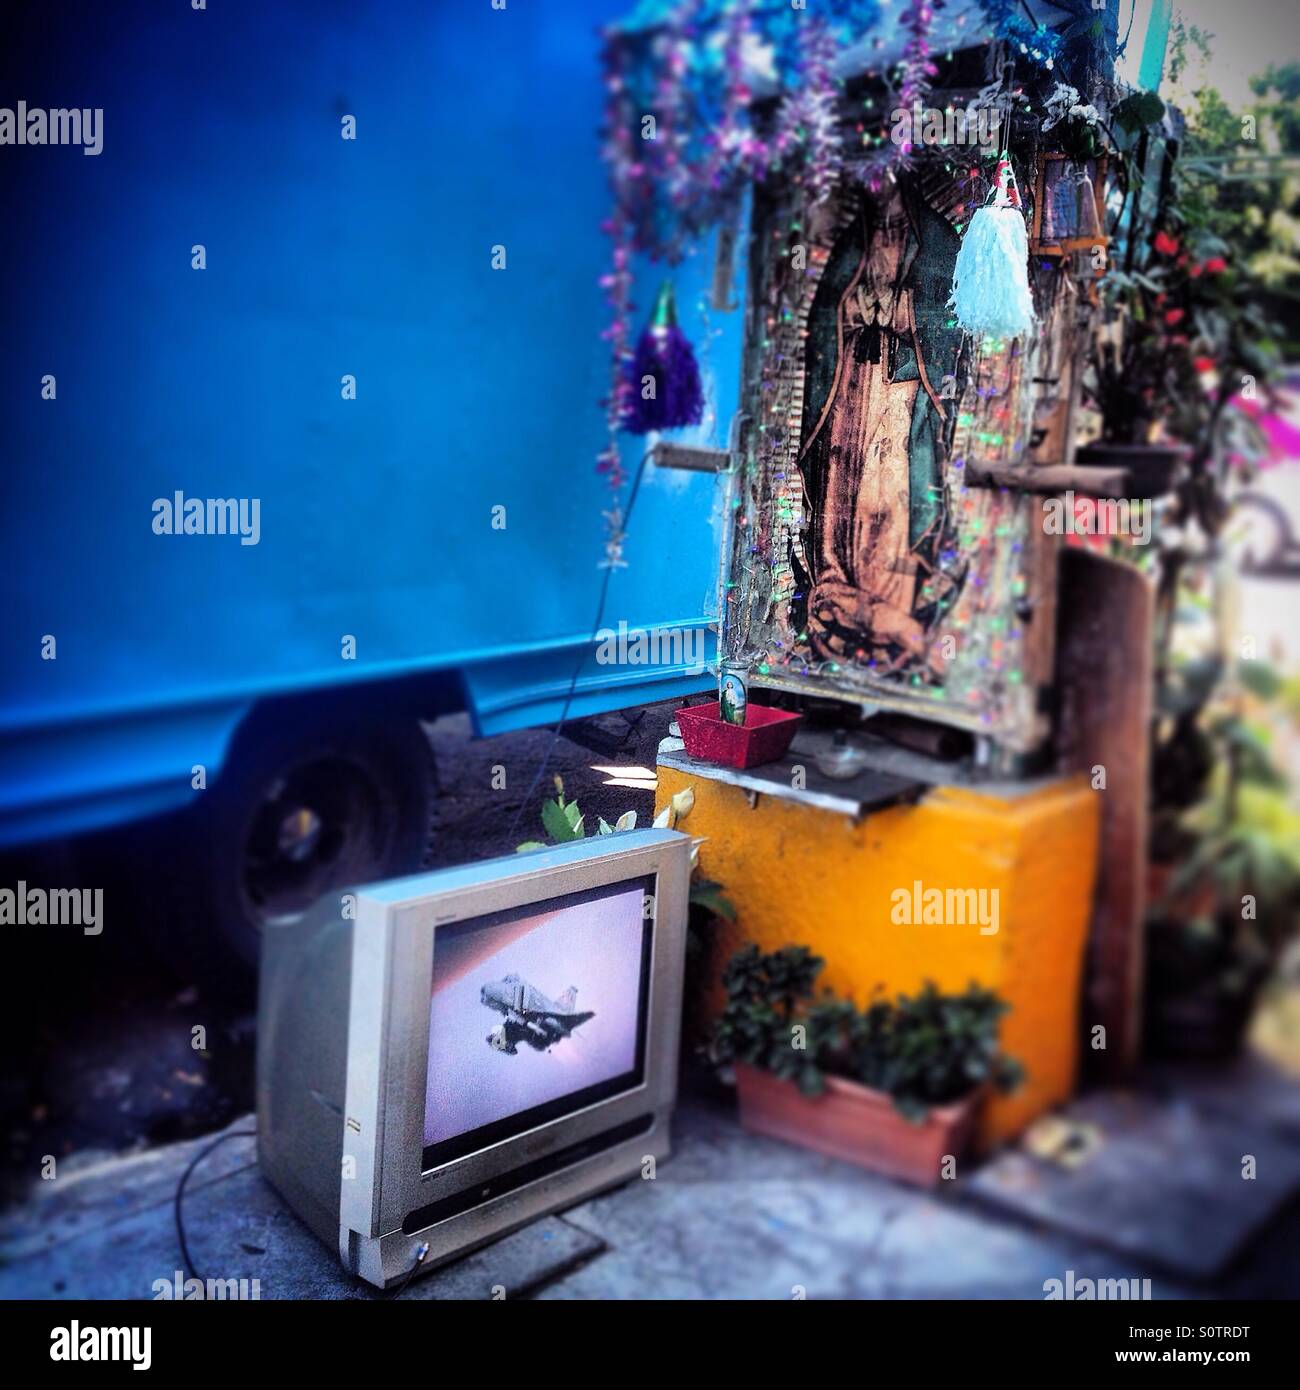 A tv showing a war plane near an altar to Our Lady of Guadalupe, in Mercado de Medellin, Colonia Roma, Mexico City, Mexico Stock Photo